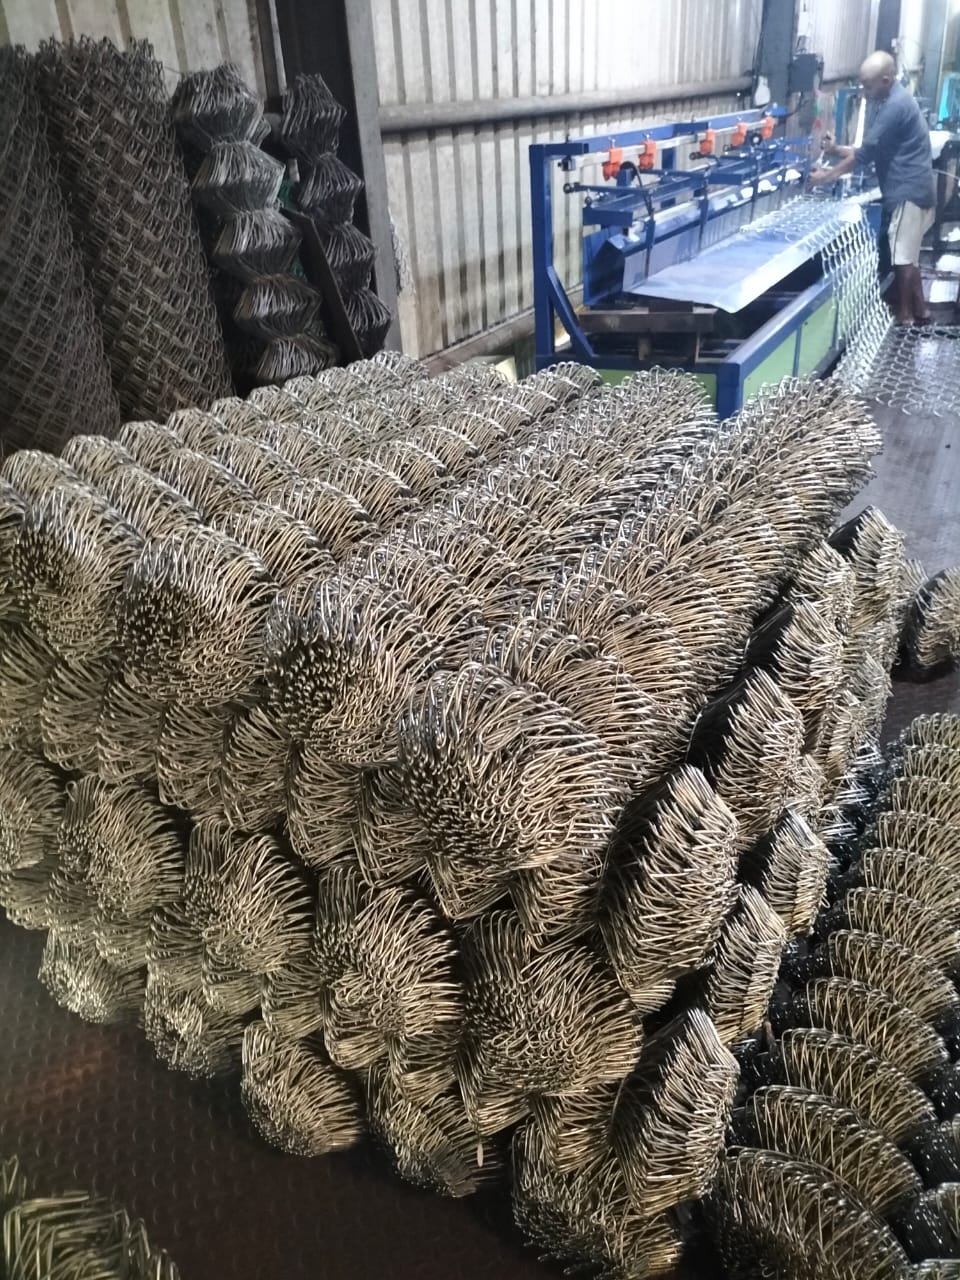 Galvanized Chain-link Fence